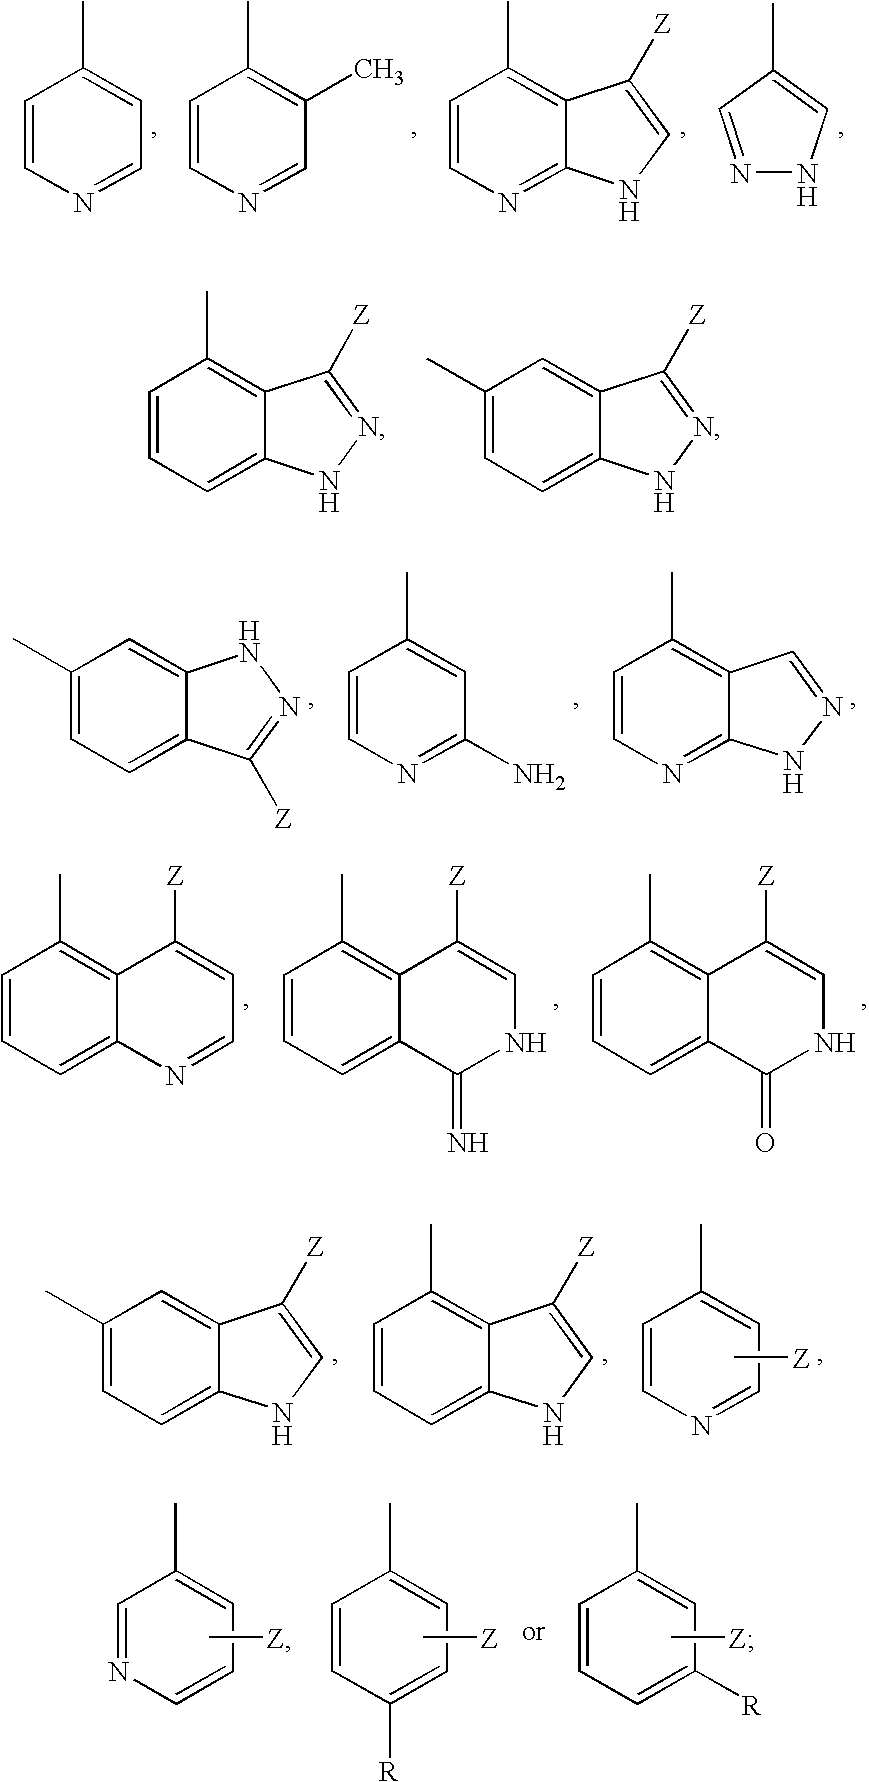 Aminopyrazine analogs for treating glaucoma and other rho kinase-mediated diseases and conditions